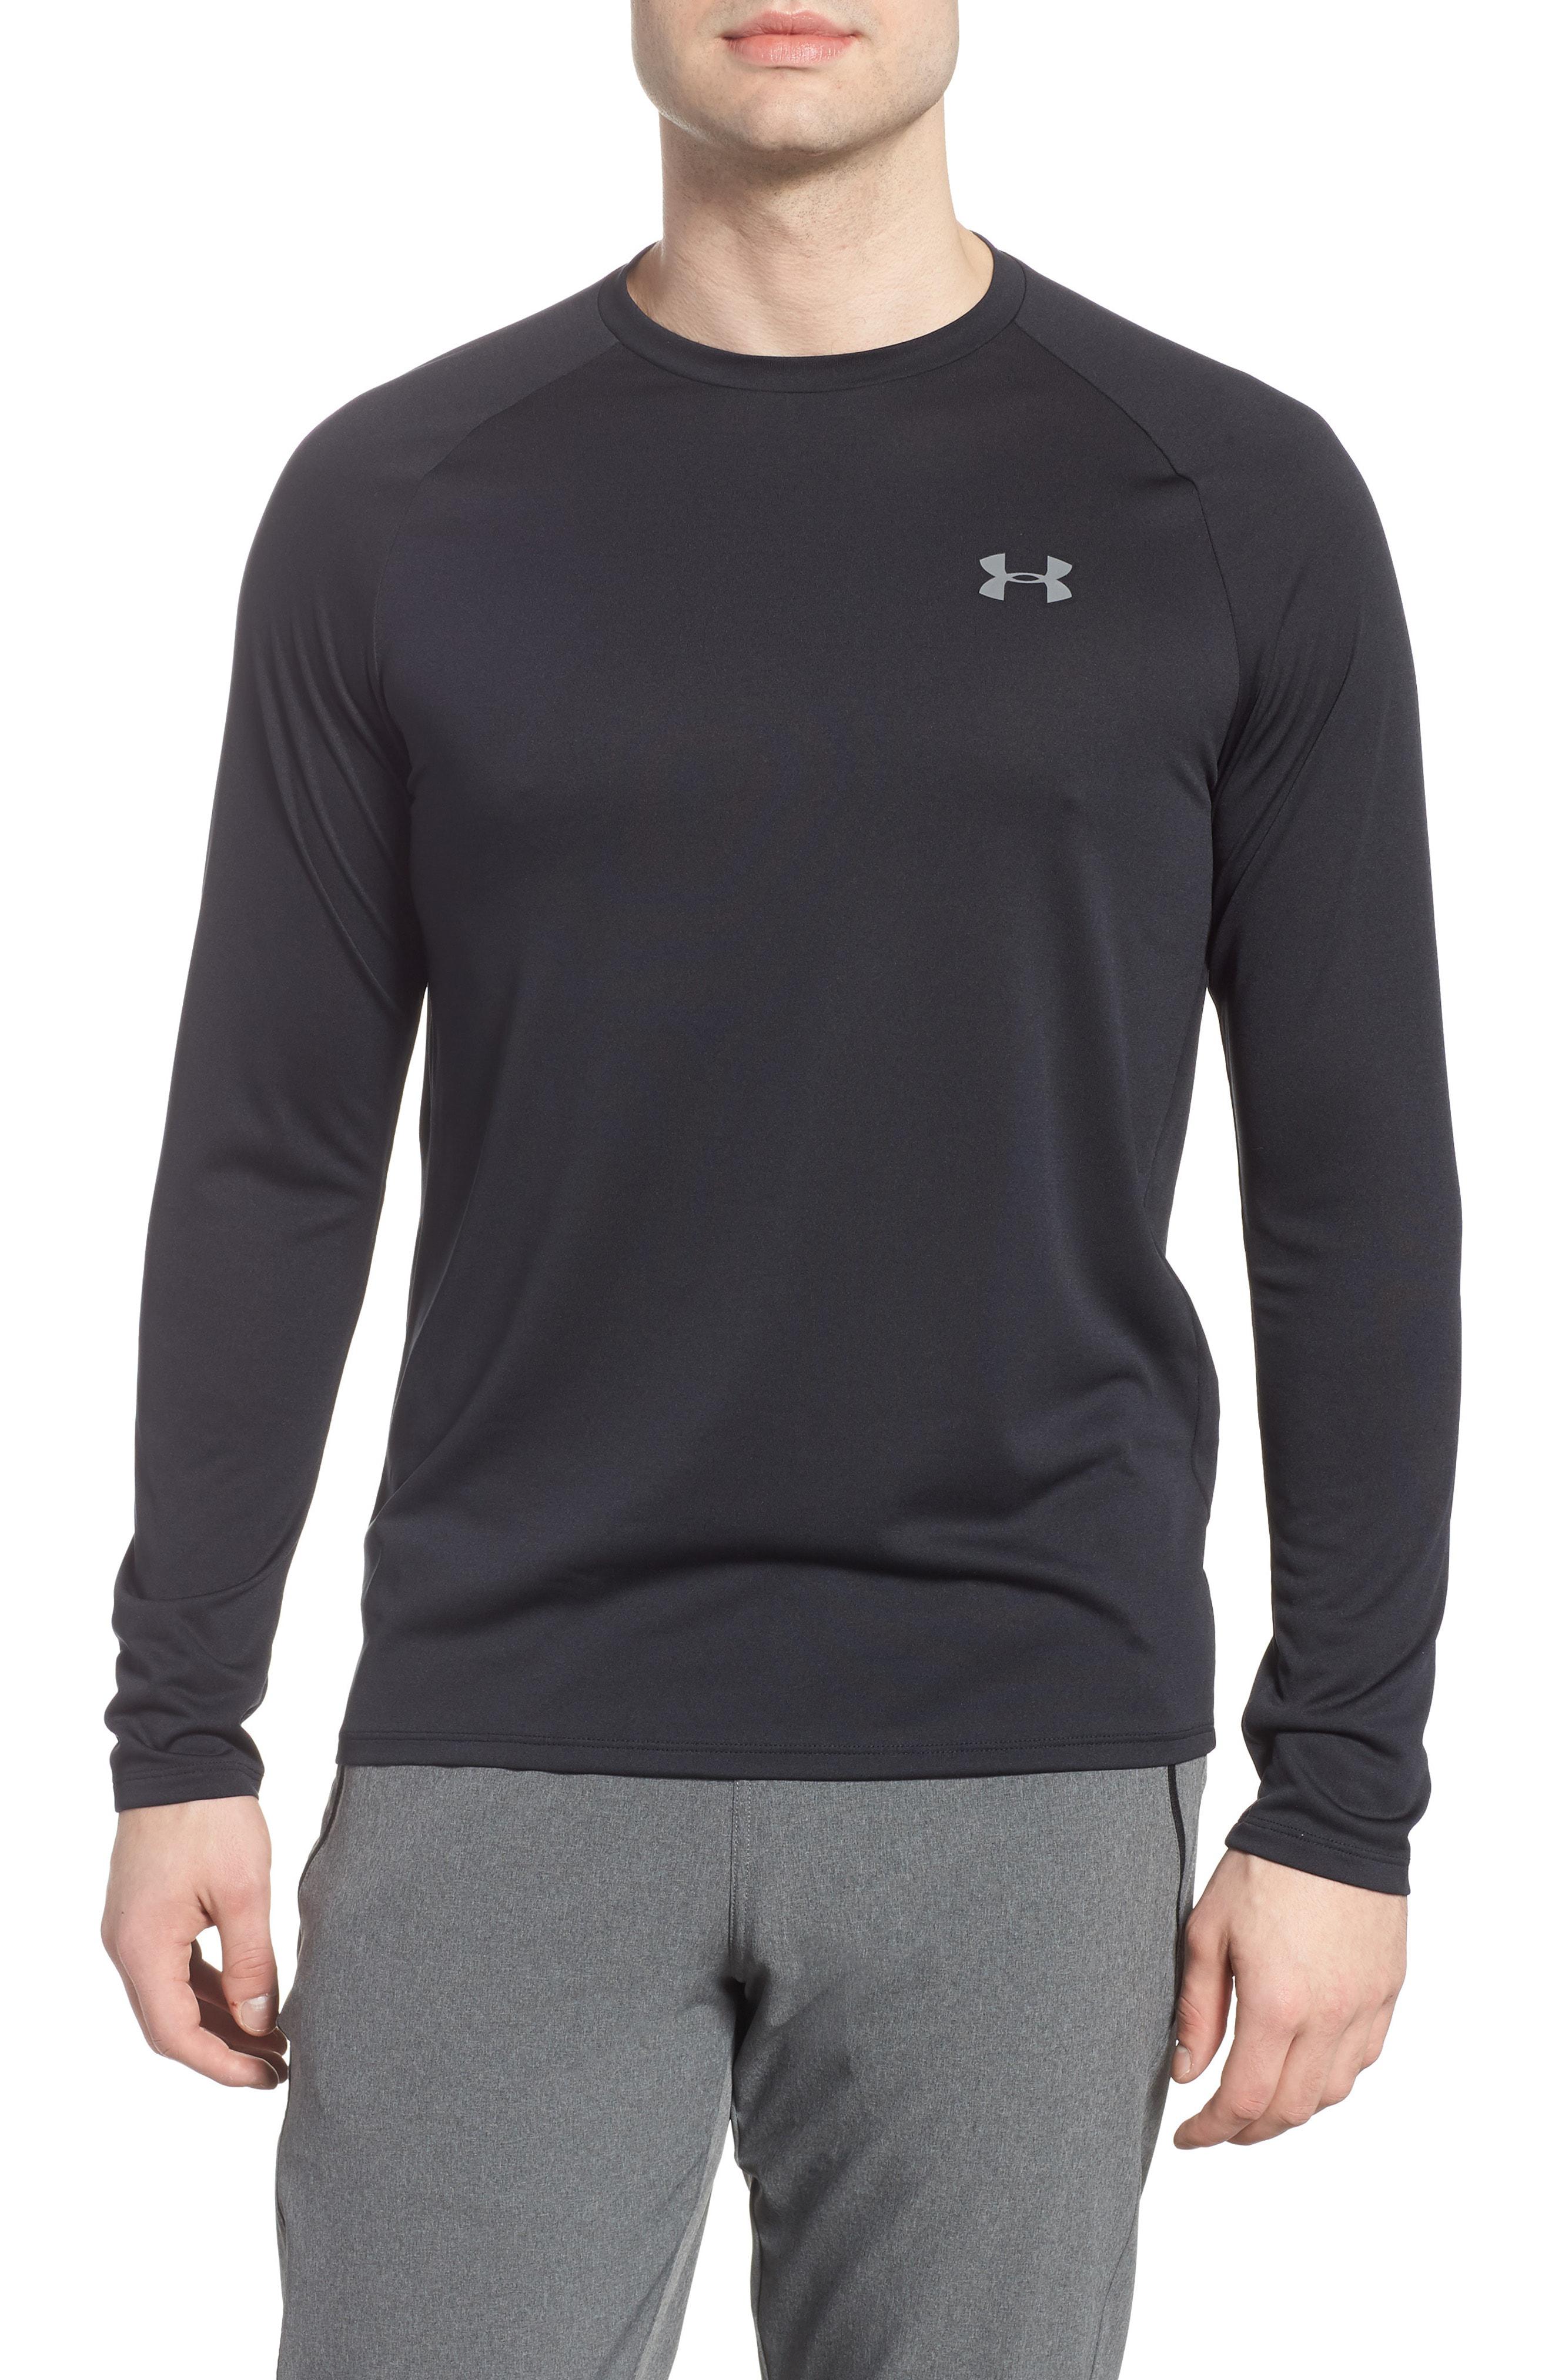 Under Armour Performance Tech Long Sleeve Shirt in Black for Men - Lyst